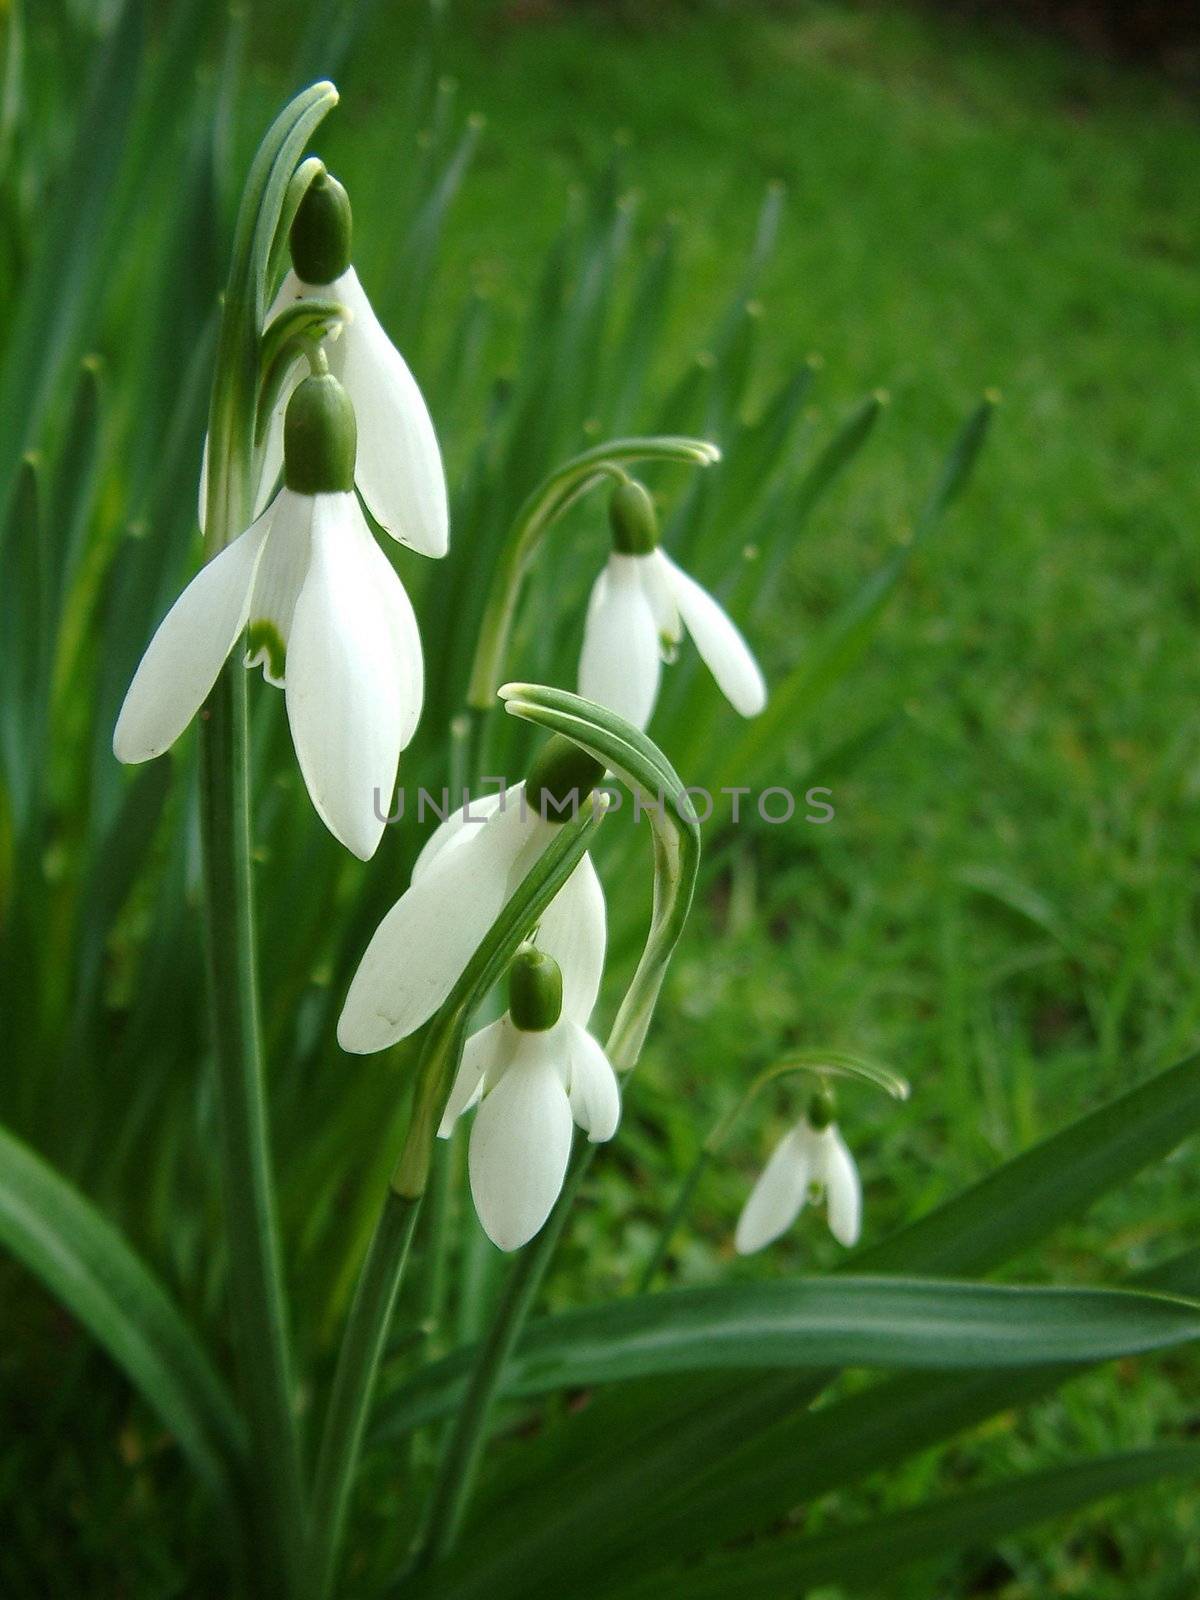 snowdrops by leafy